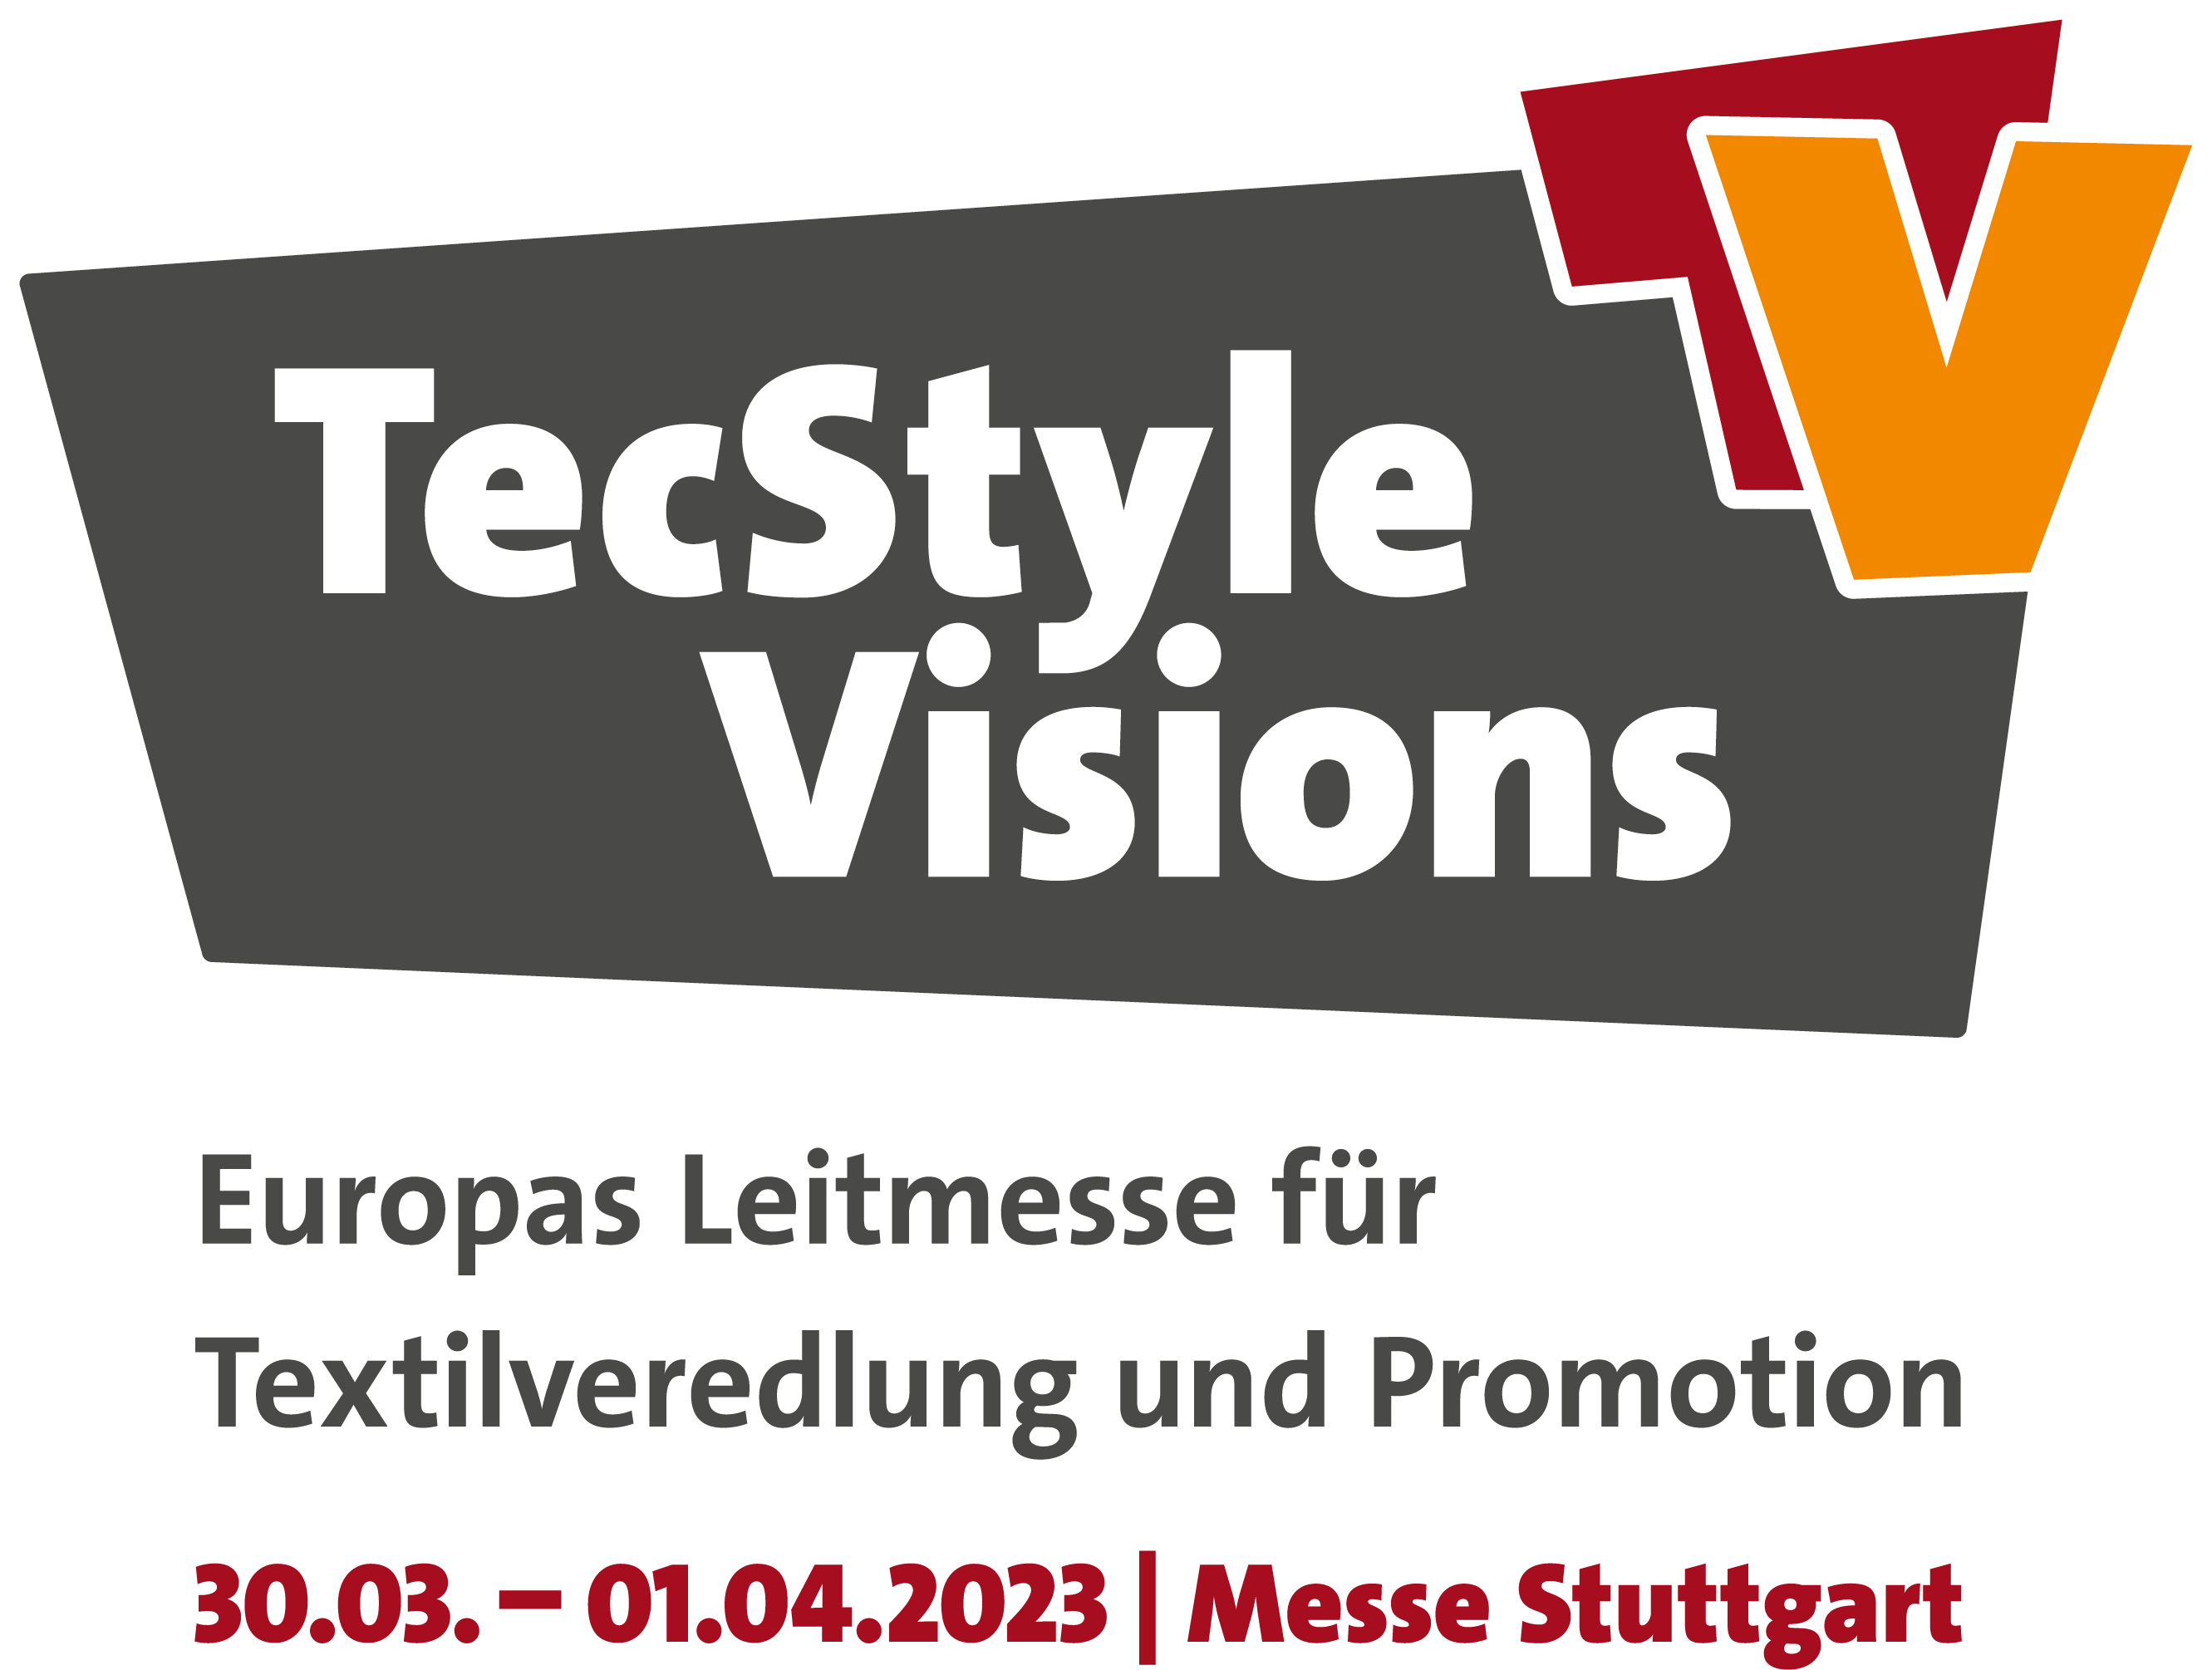 TV Tecstyle Visions